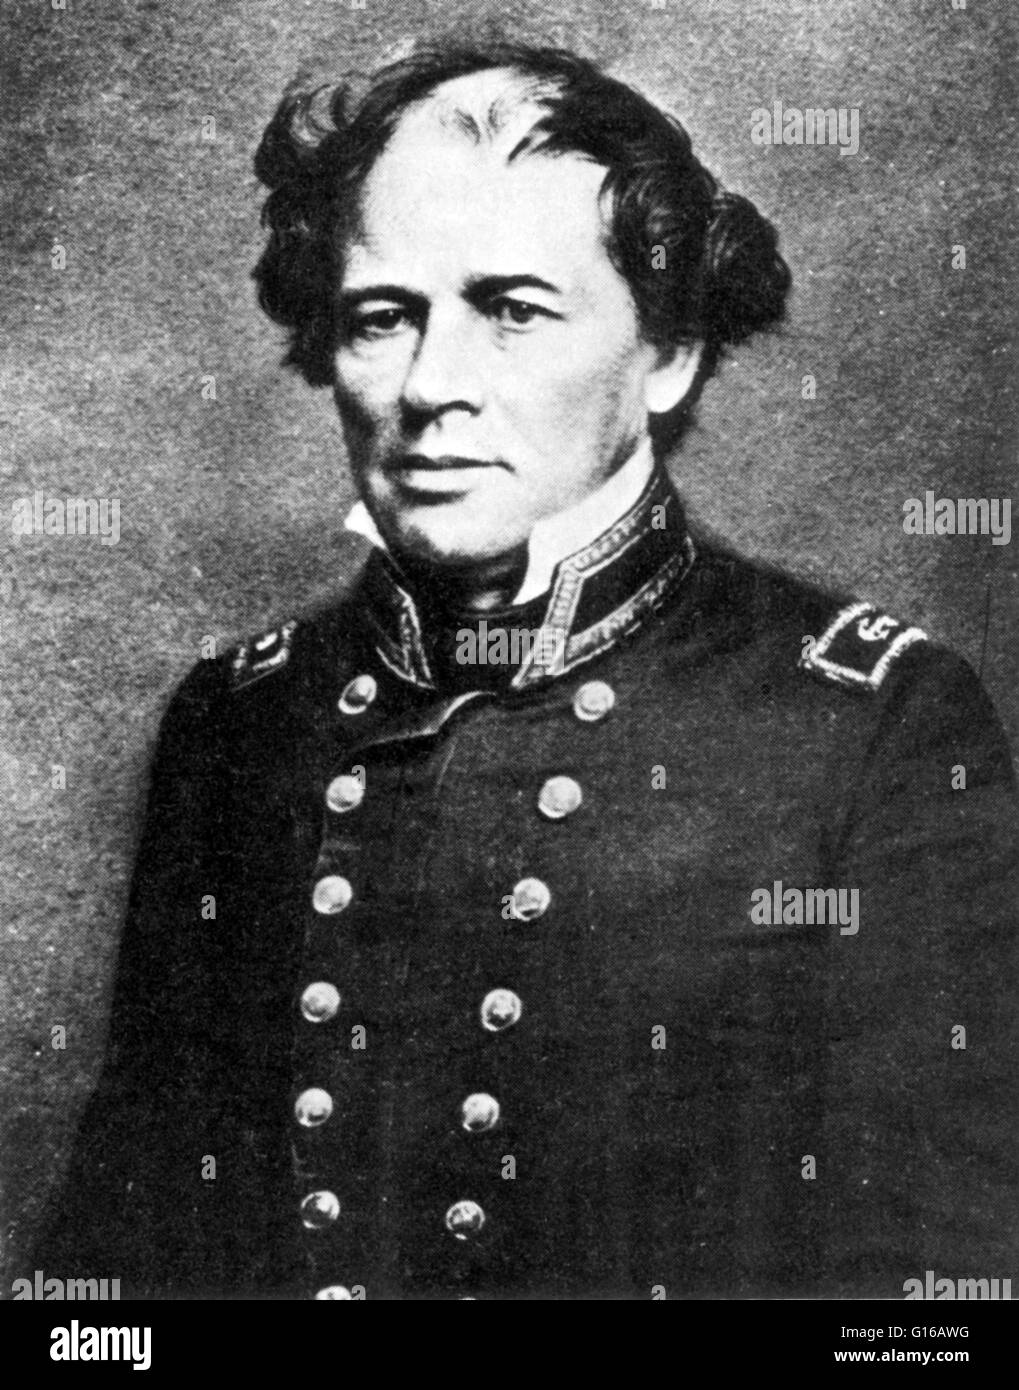 Undated photograph of Lieutenant Maury, US Navy. Matthew Fontaine Maury (January 14, 1806 - February 1, 1873) was an American astronomer, historian, oceanographer, meteorologist, cartographer, author, geologist, and educator. He was nicknamed 'Pathfinder Stock Photo